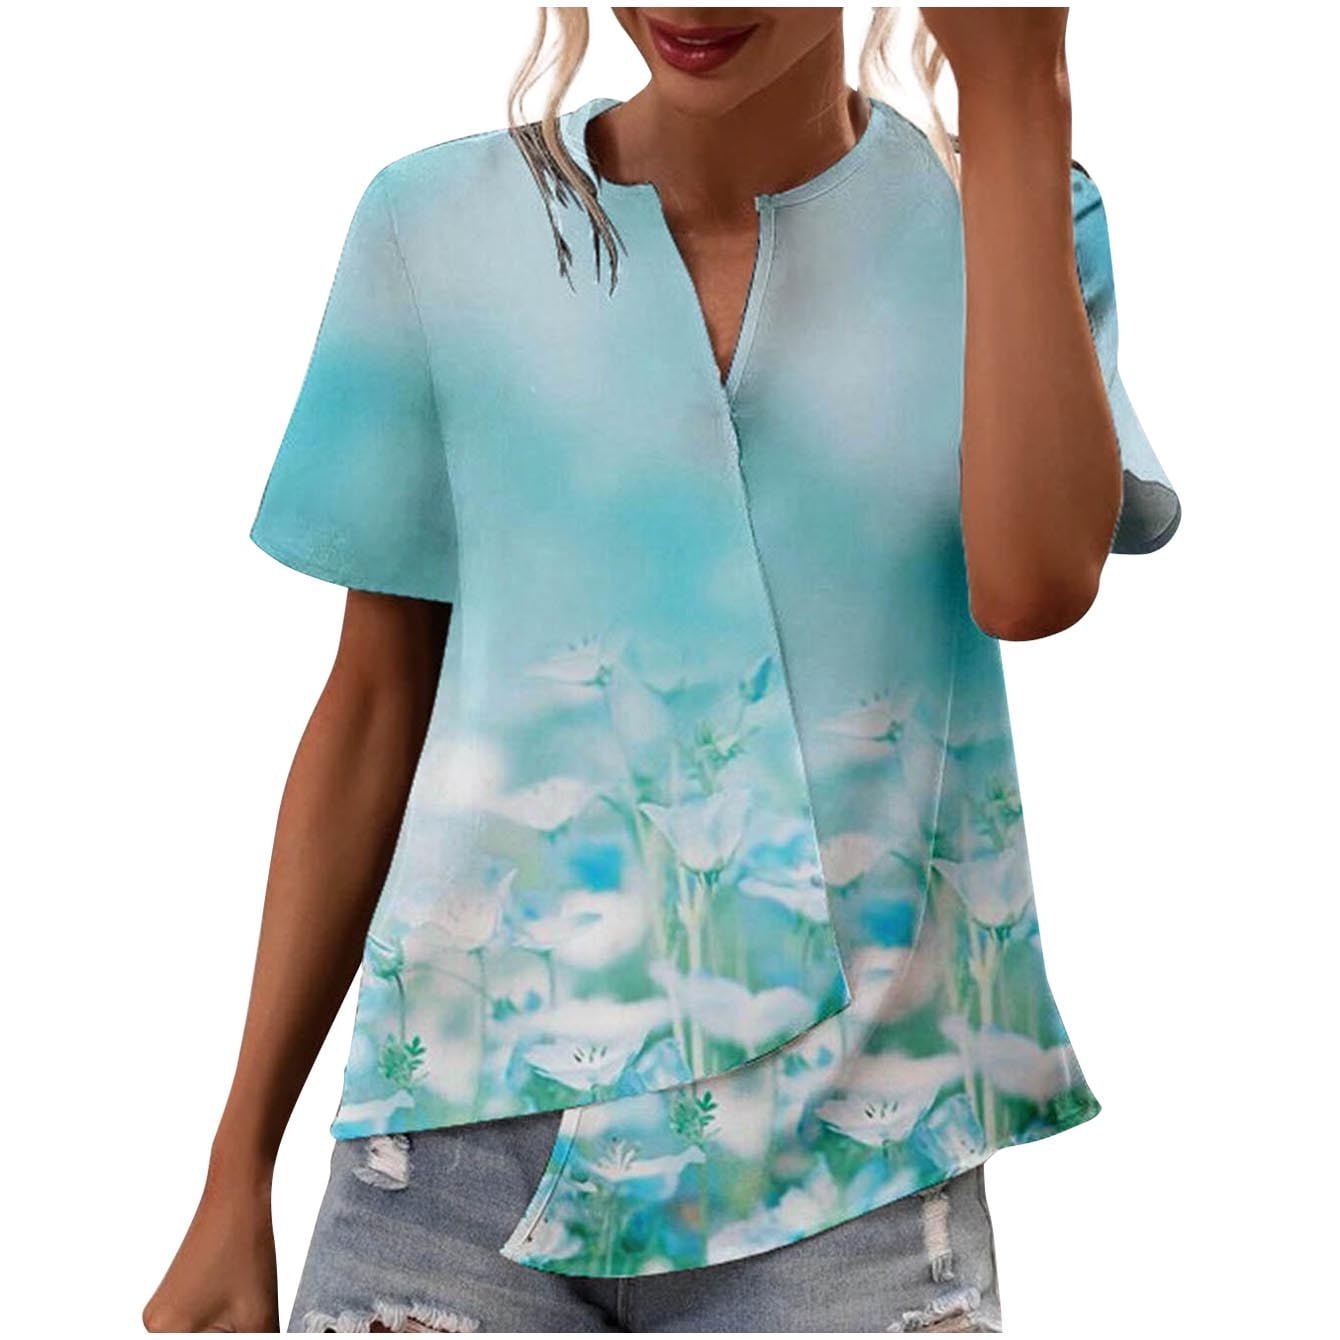 ZQGJB Summer Casual Short Sleeve Shirts for Women Solid Color Crewneck Tees  Loose Tassels Cotton T-Shirts Trendy Cozy Tunic Blouse Light Blue L